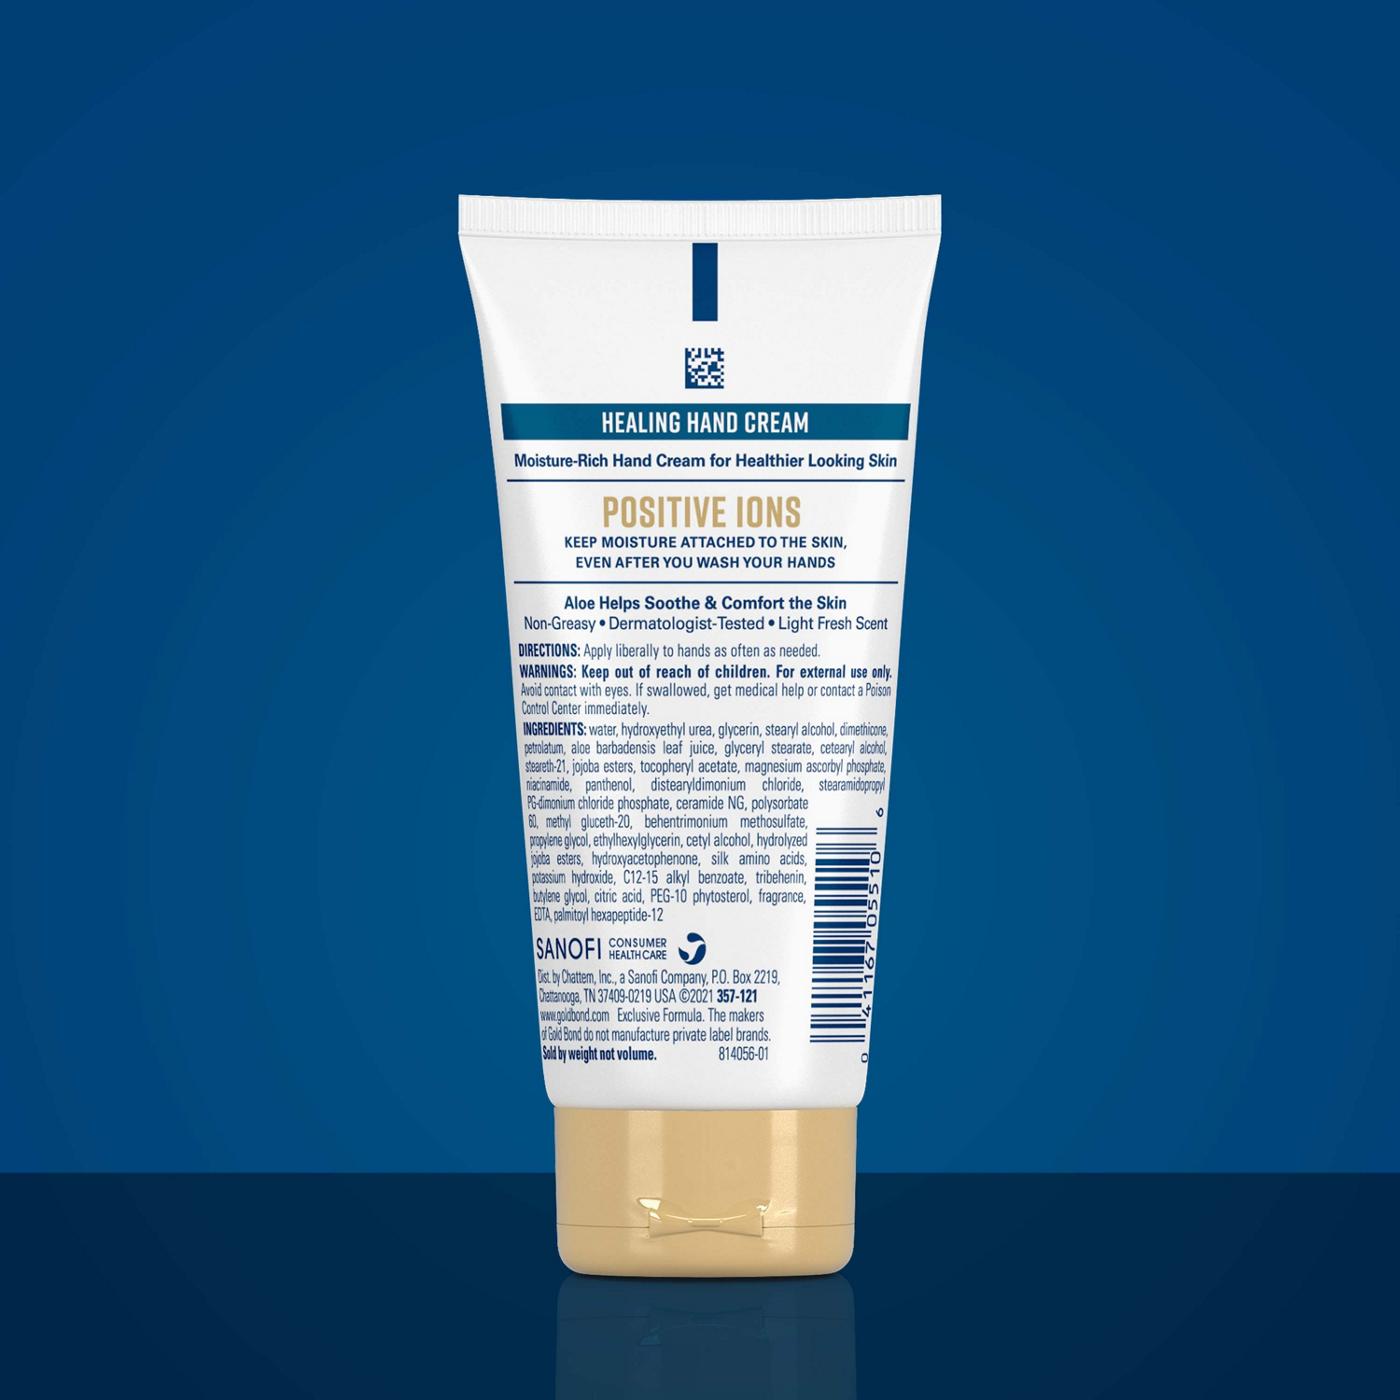 Gold Bond Healing Hand Cream With Aloe to Soothe & Comfort; image 2 of 5